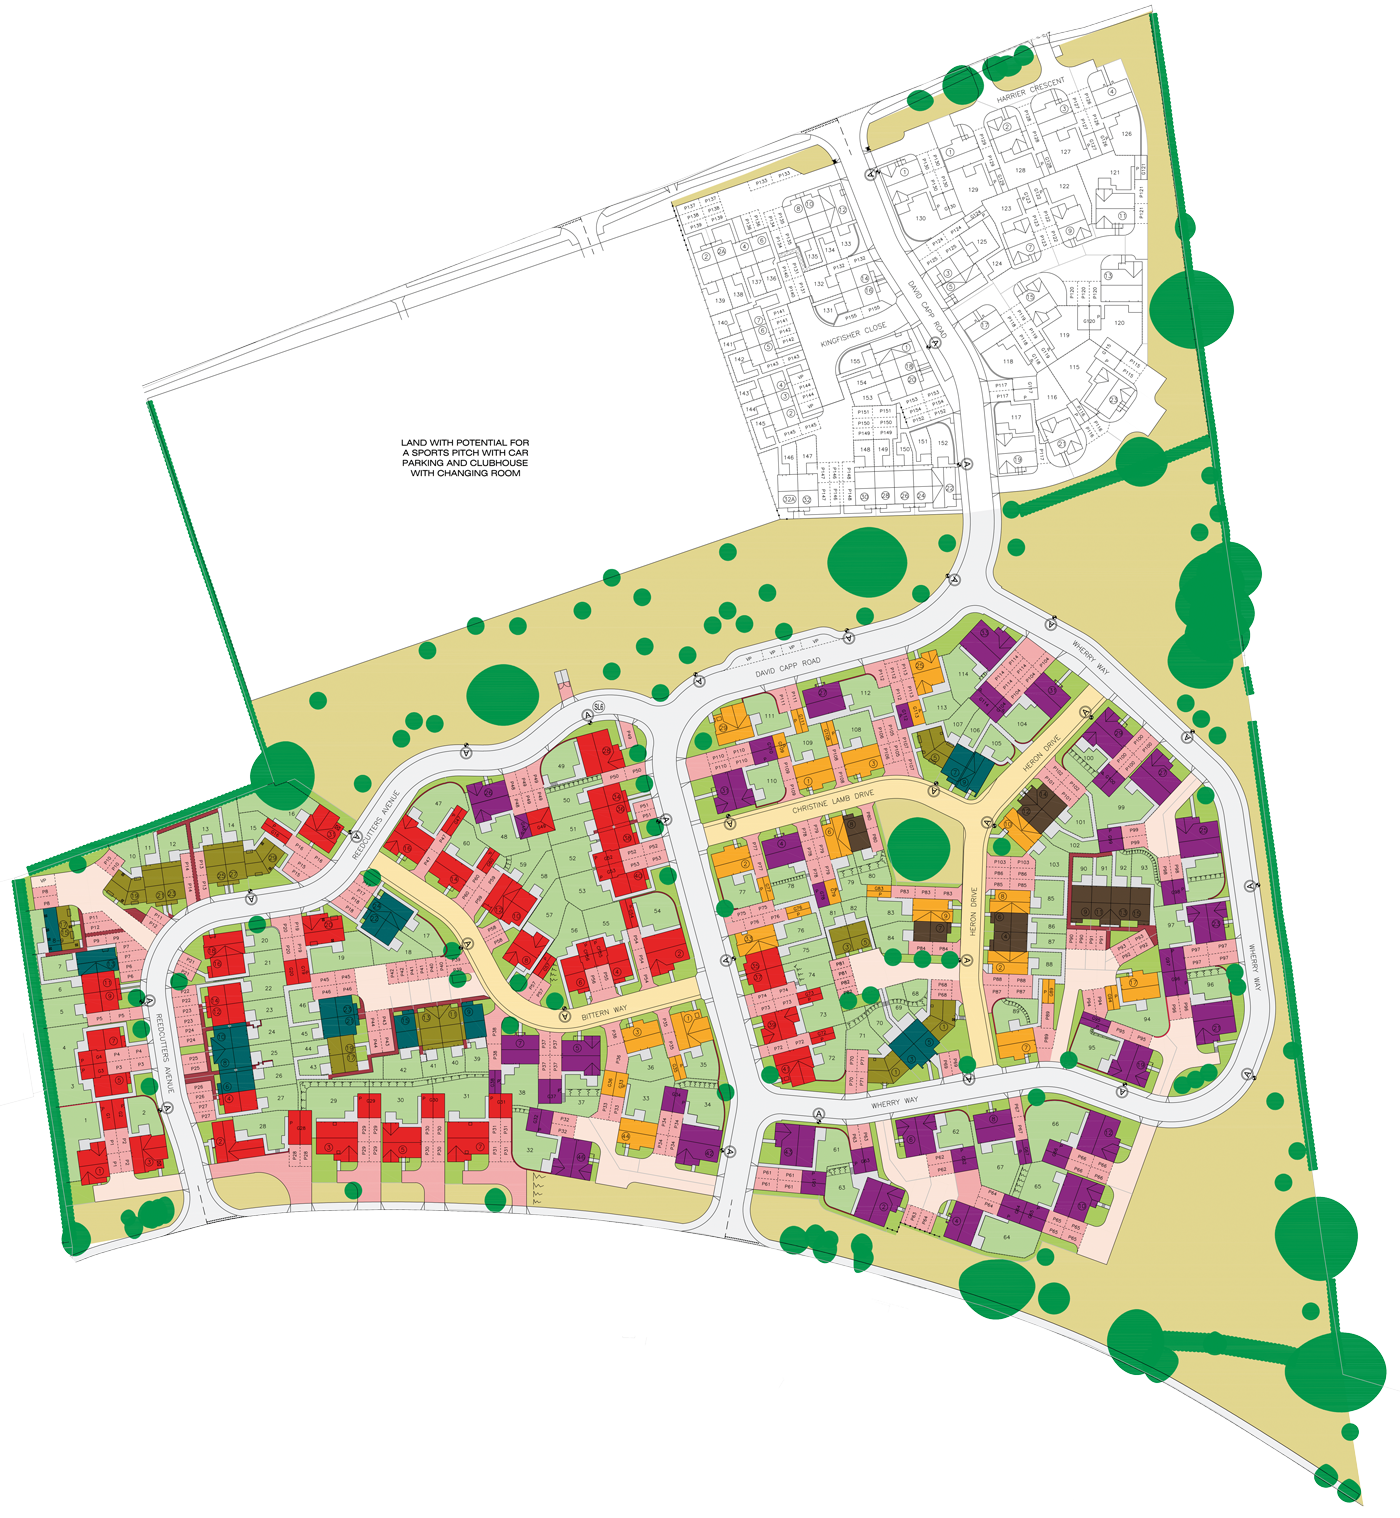 PNG format site plan for this housing development